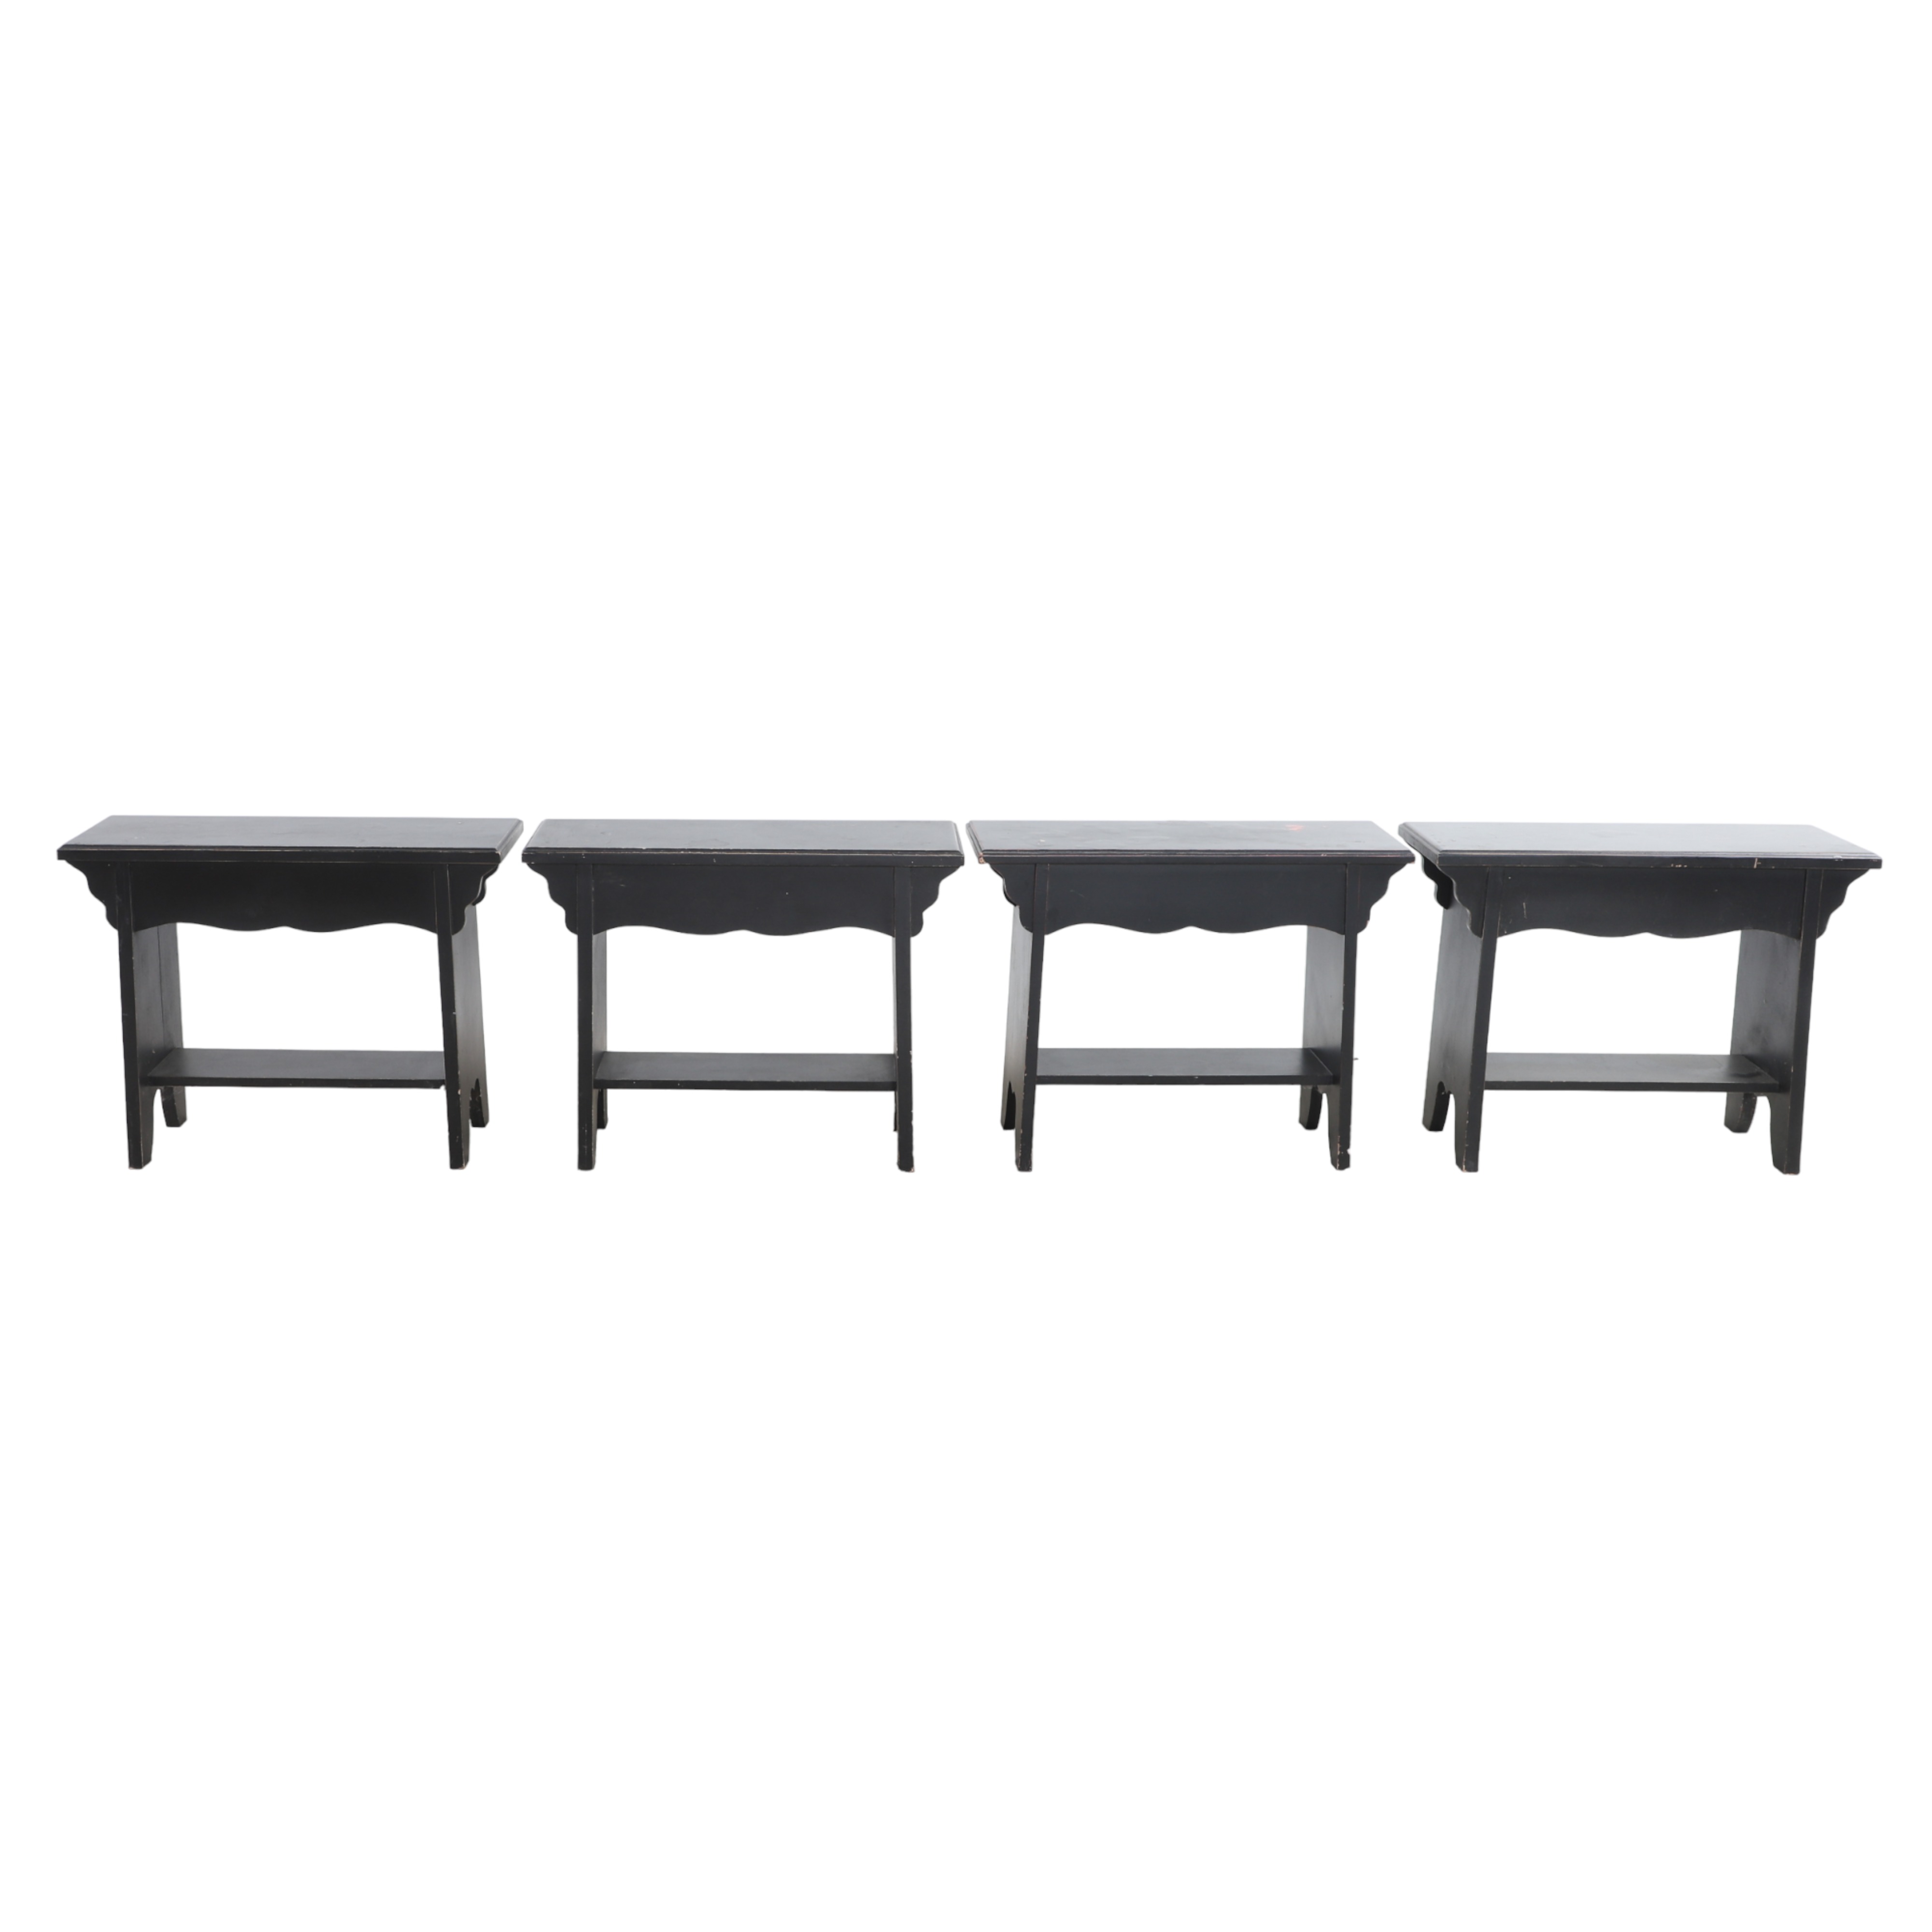  4 Ebonized benches cut out in 3ca7bd